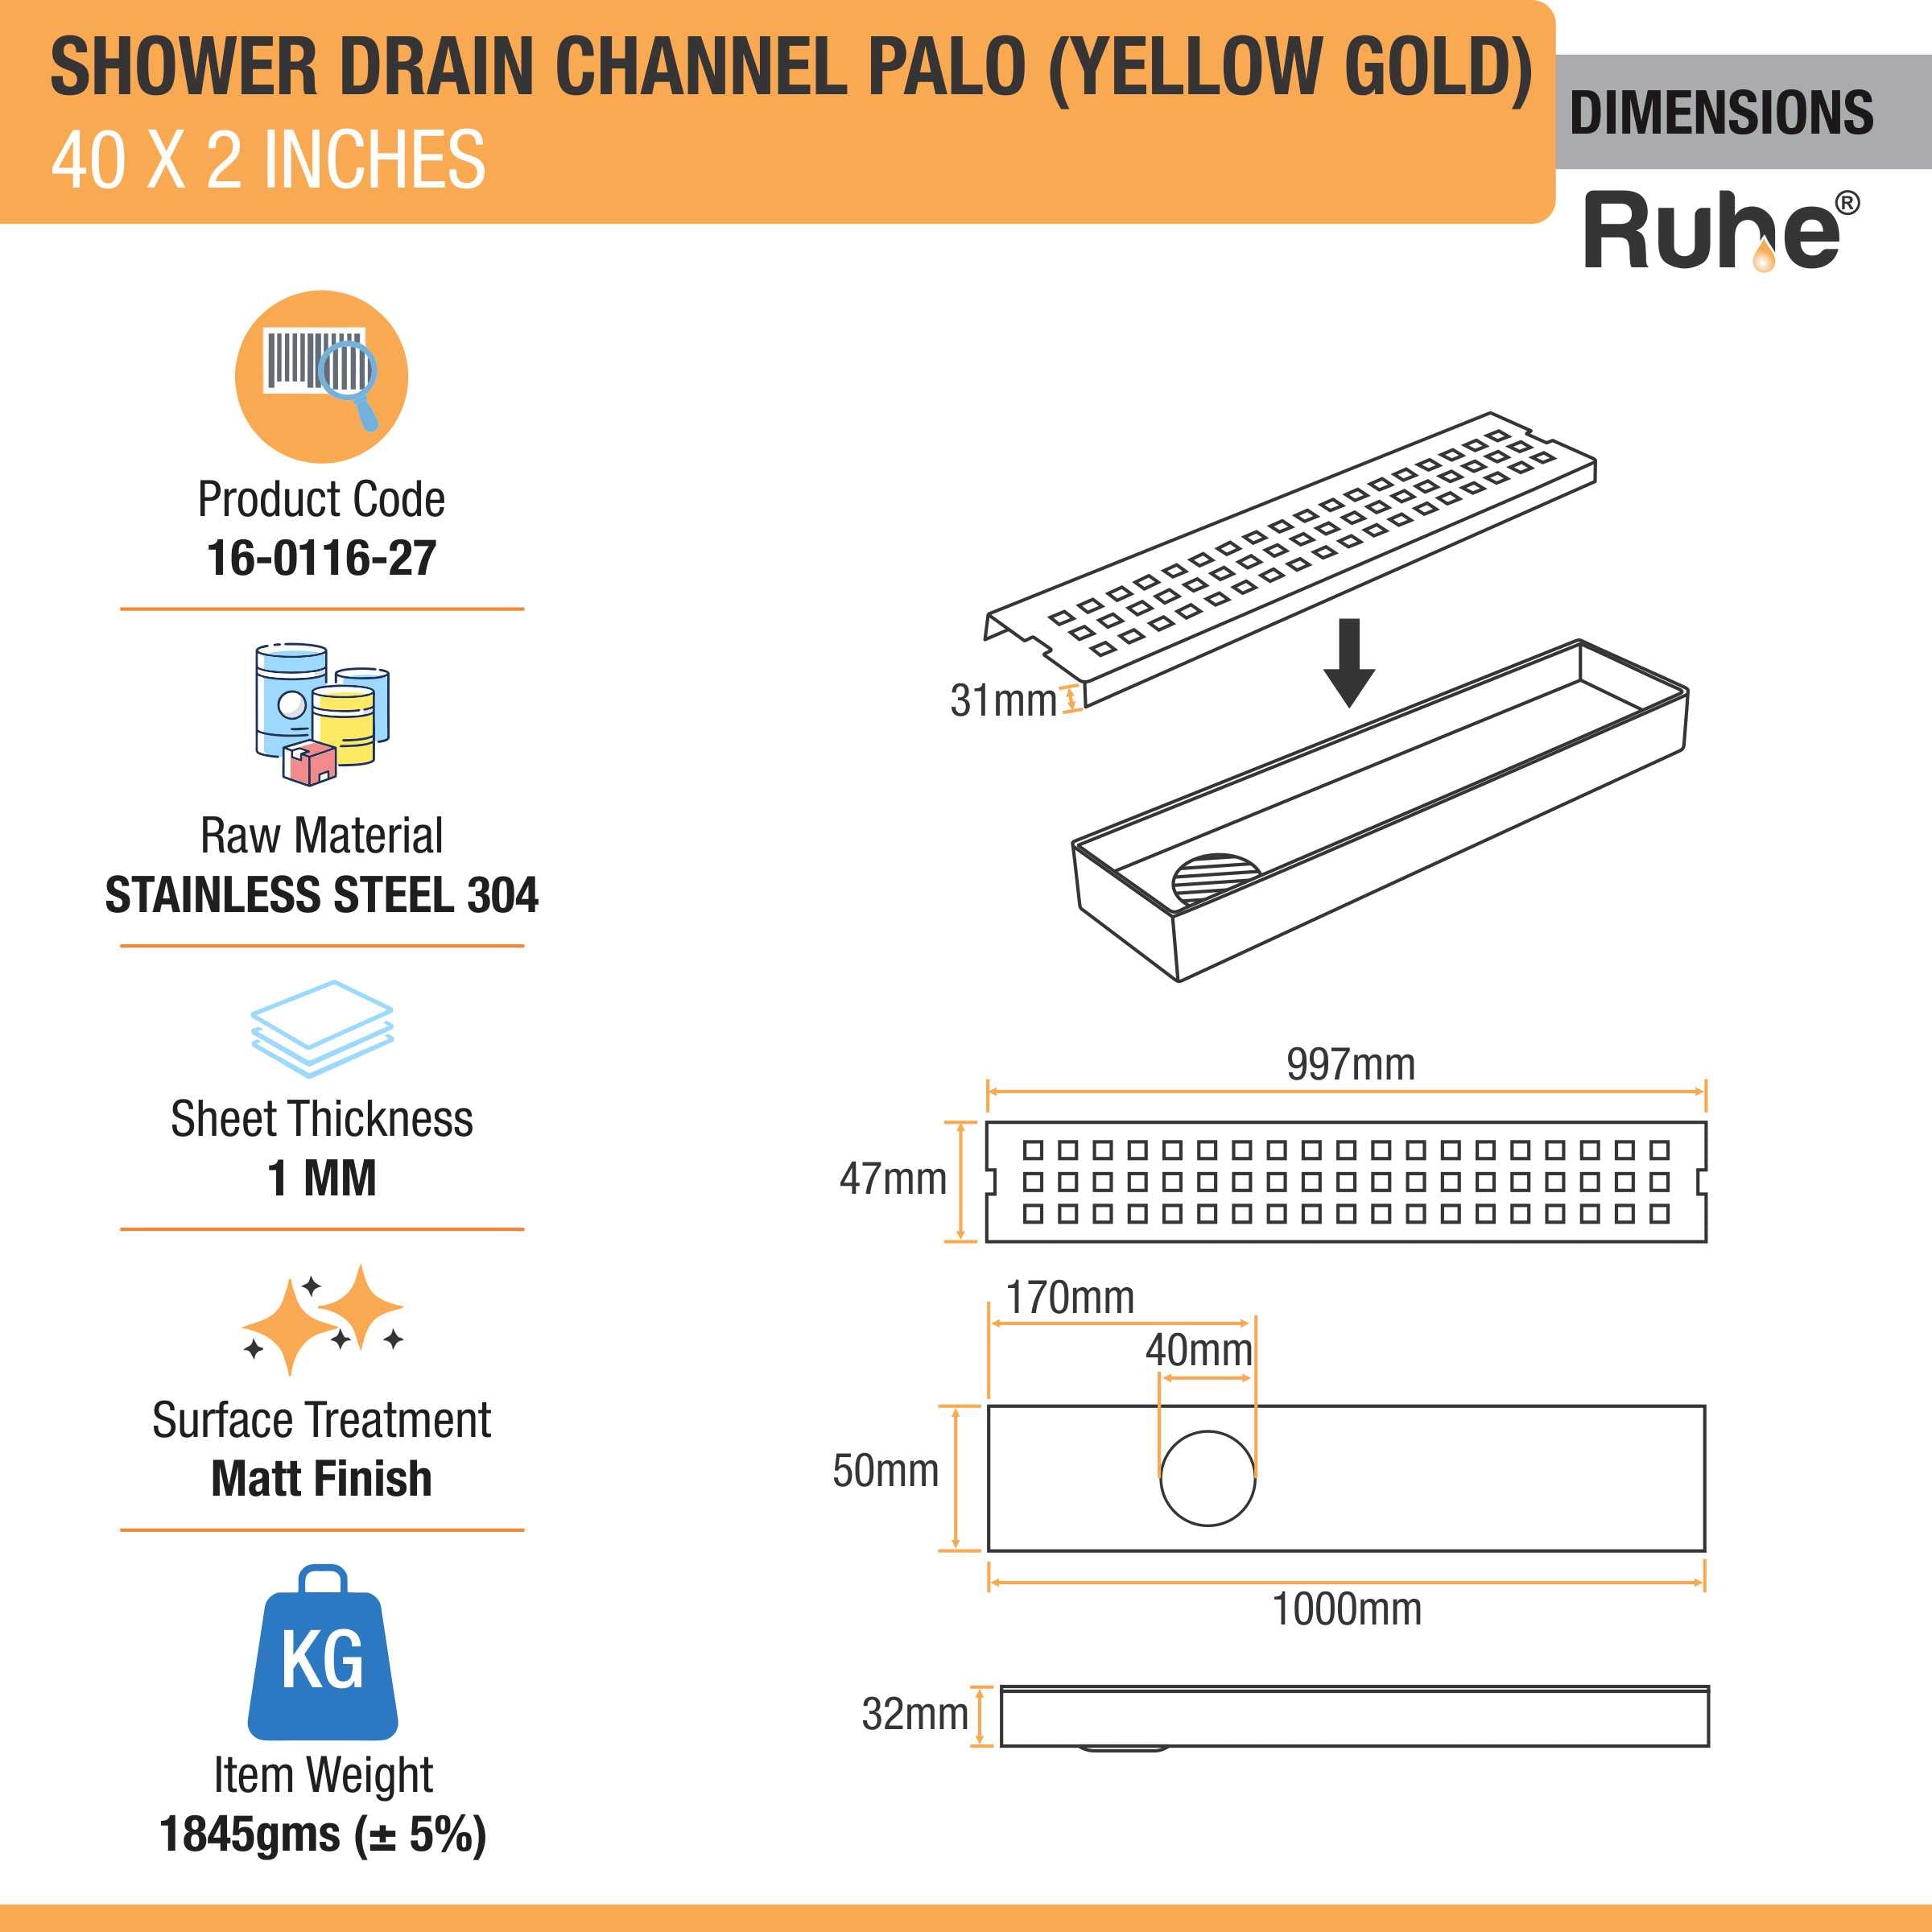 Palo Shower Drain Channel (40 x 2 Inches) YELLOW GOLD dimensions and size